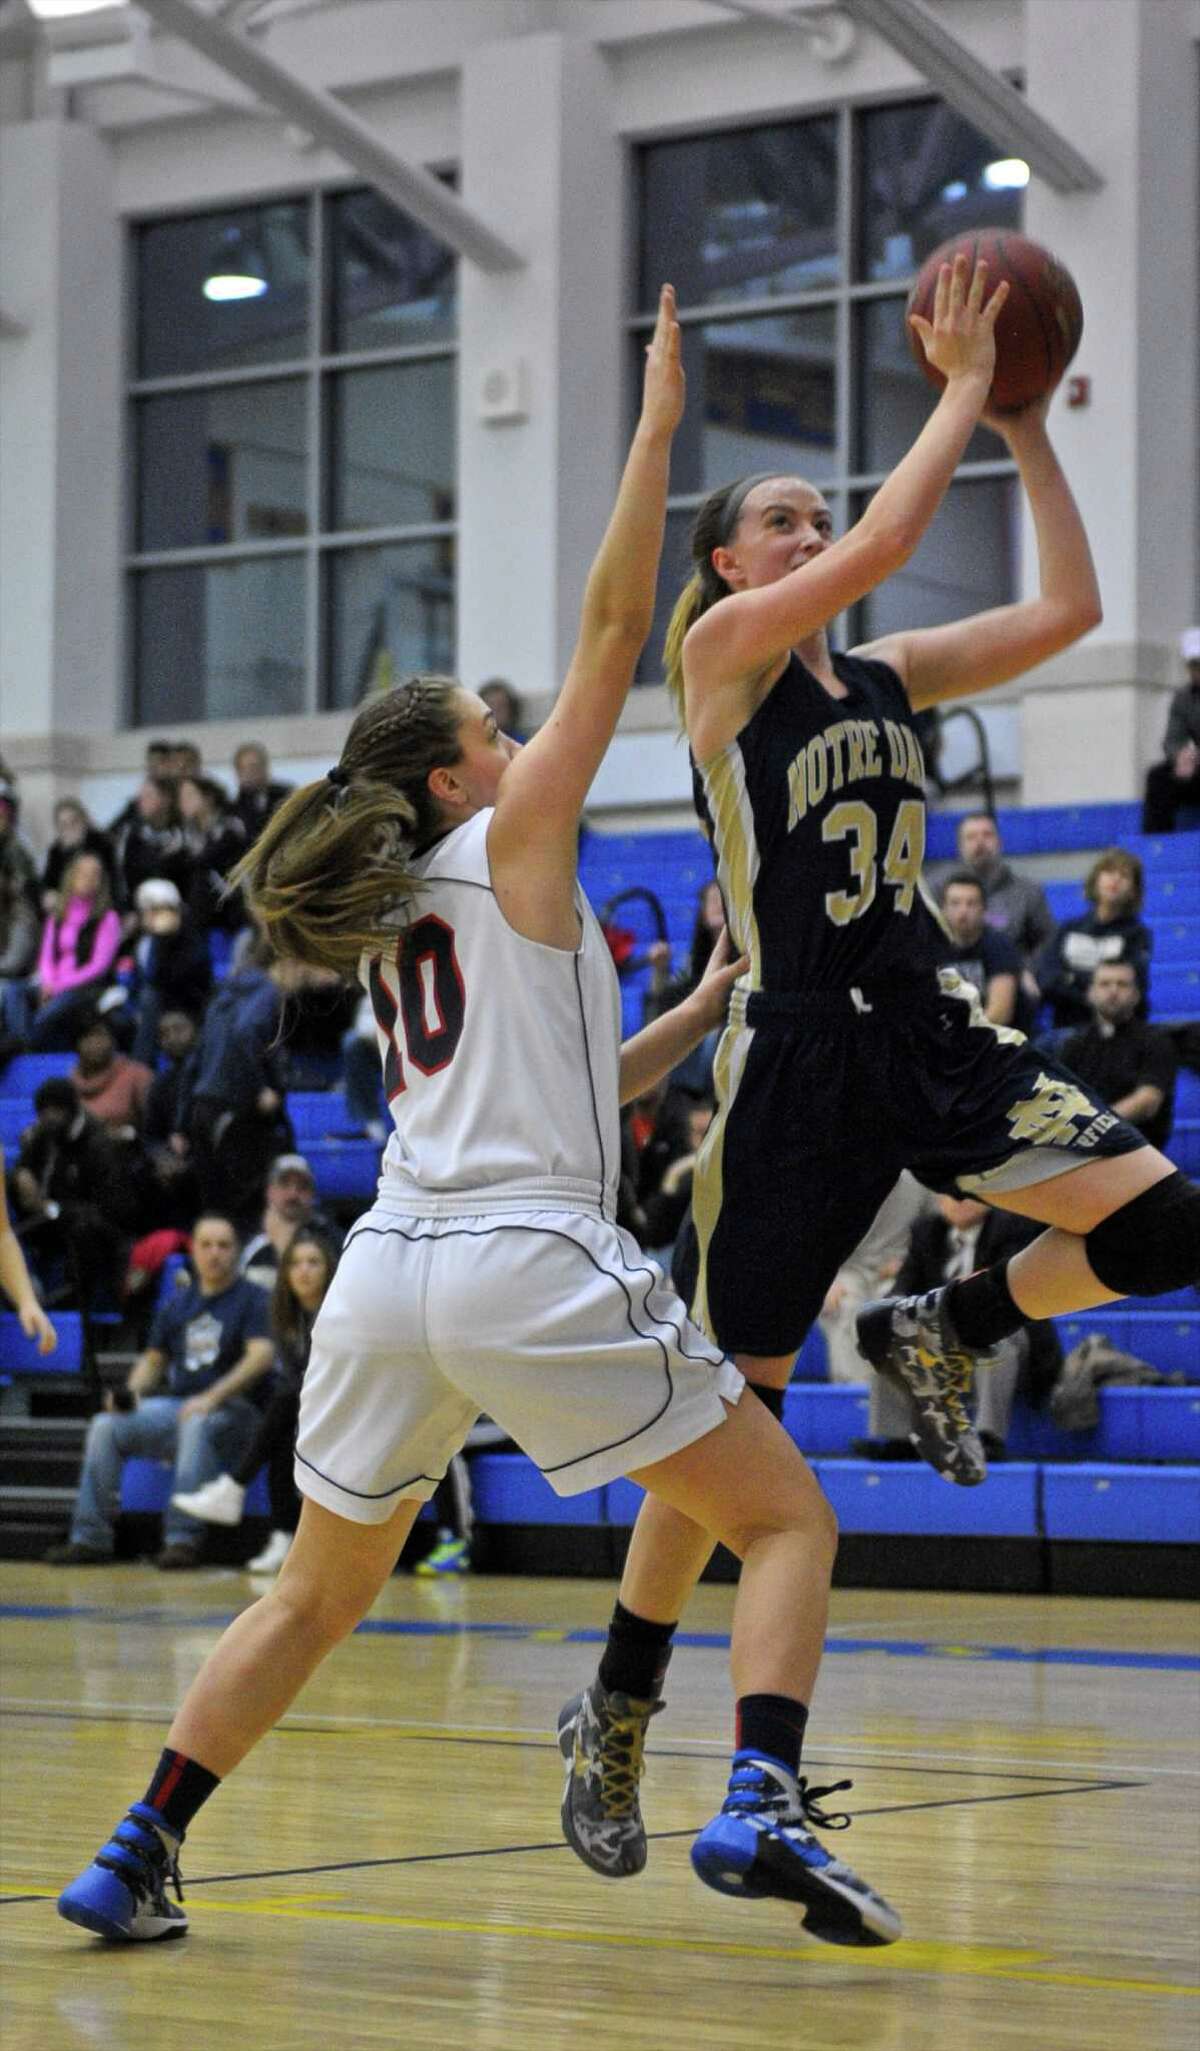 Notre Dame-Fairfield's Raina Ceryak (34) goes by New Fairfield's Sydney Gouyveia (10) on her way to the basket in the SWC girls high school championship game between Notre Dame-Fairfield and New Fairfield high school, on Wednesday night, February 24, 2016, at New Town High School, Newtown, Conn.